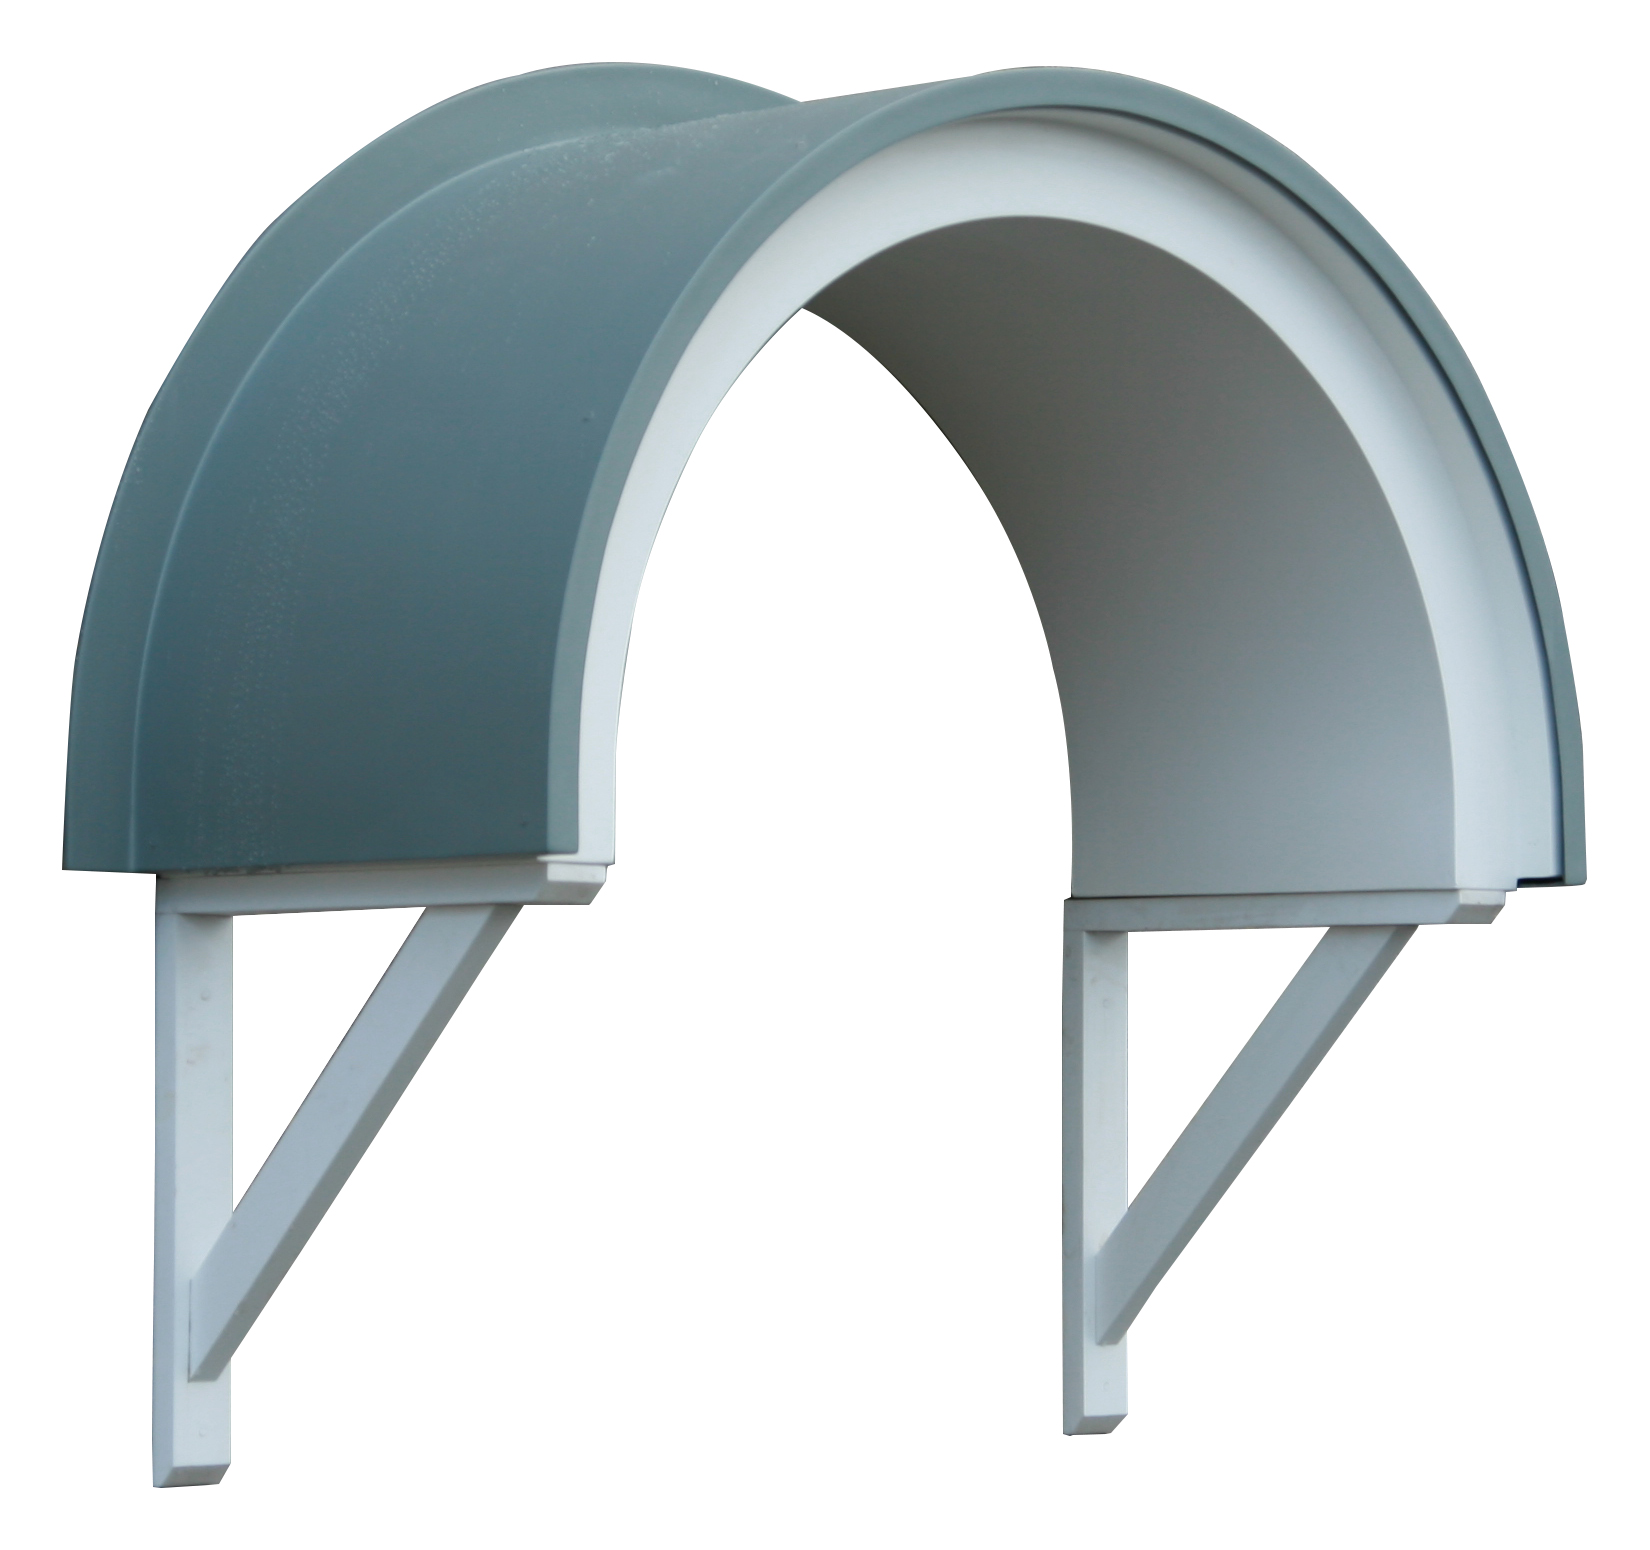 Hamble replica Lead Curved Roof Canopy 756x1390